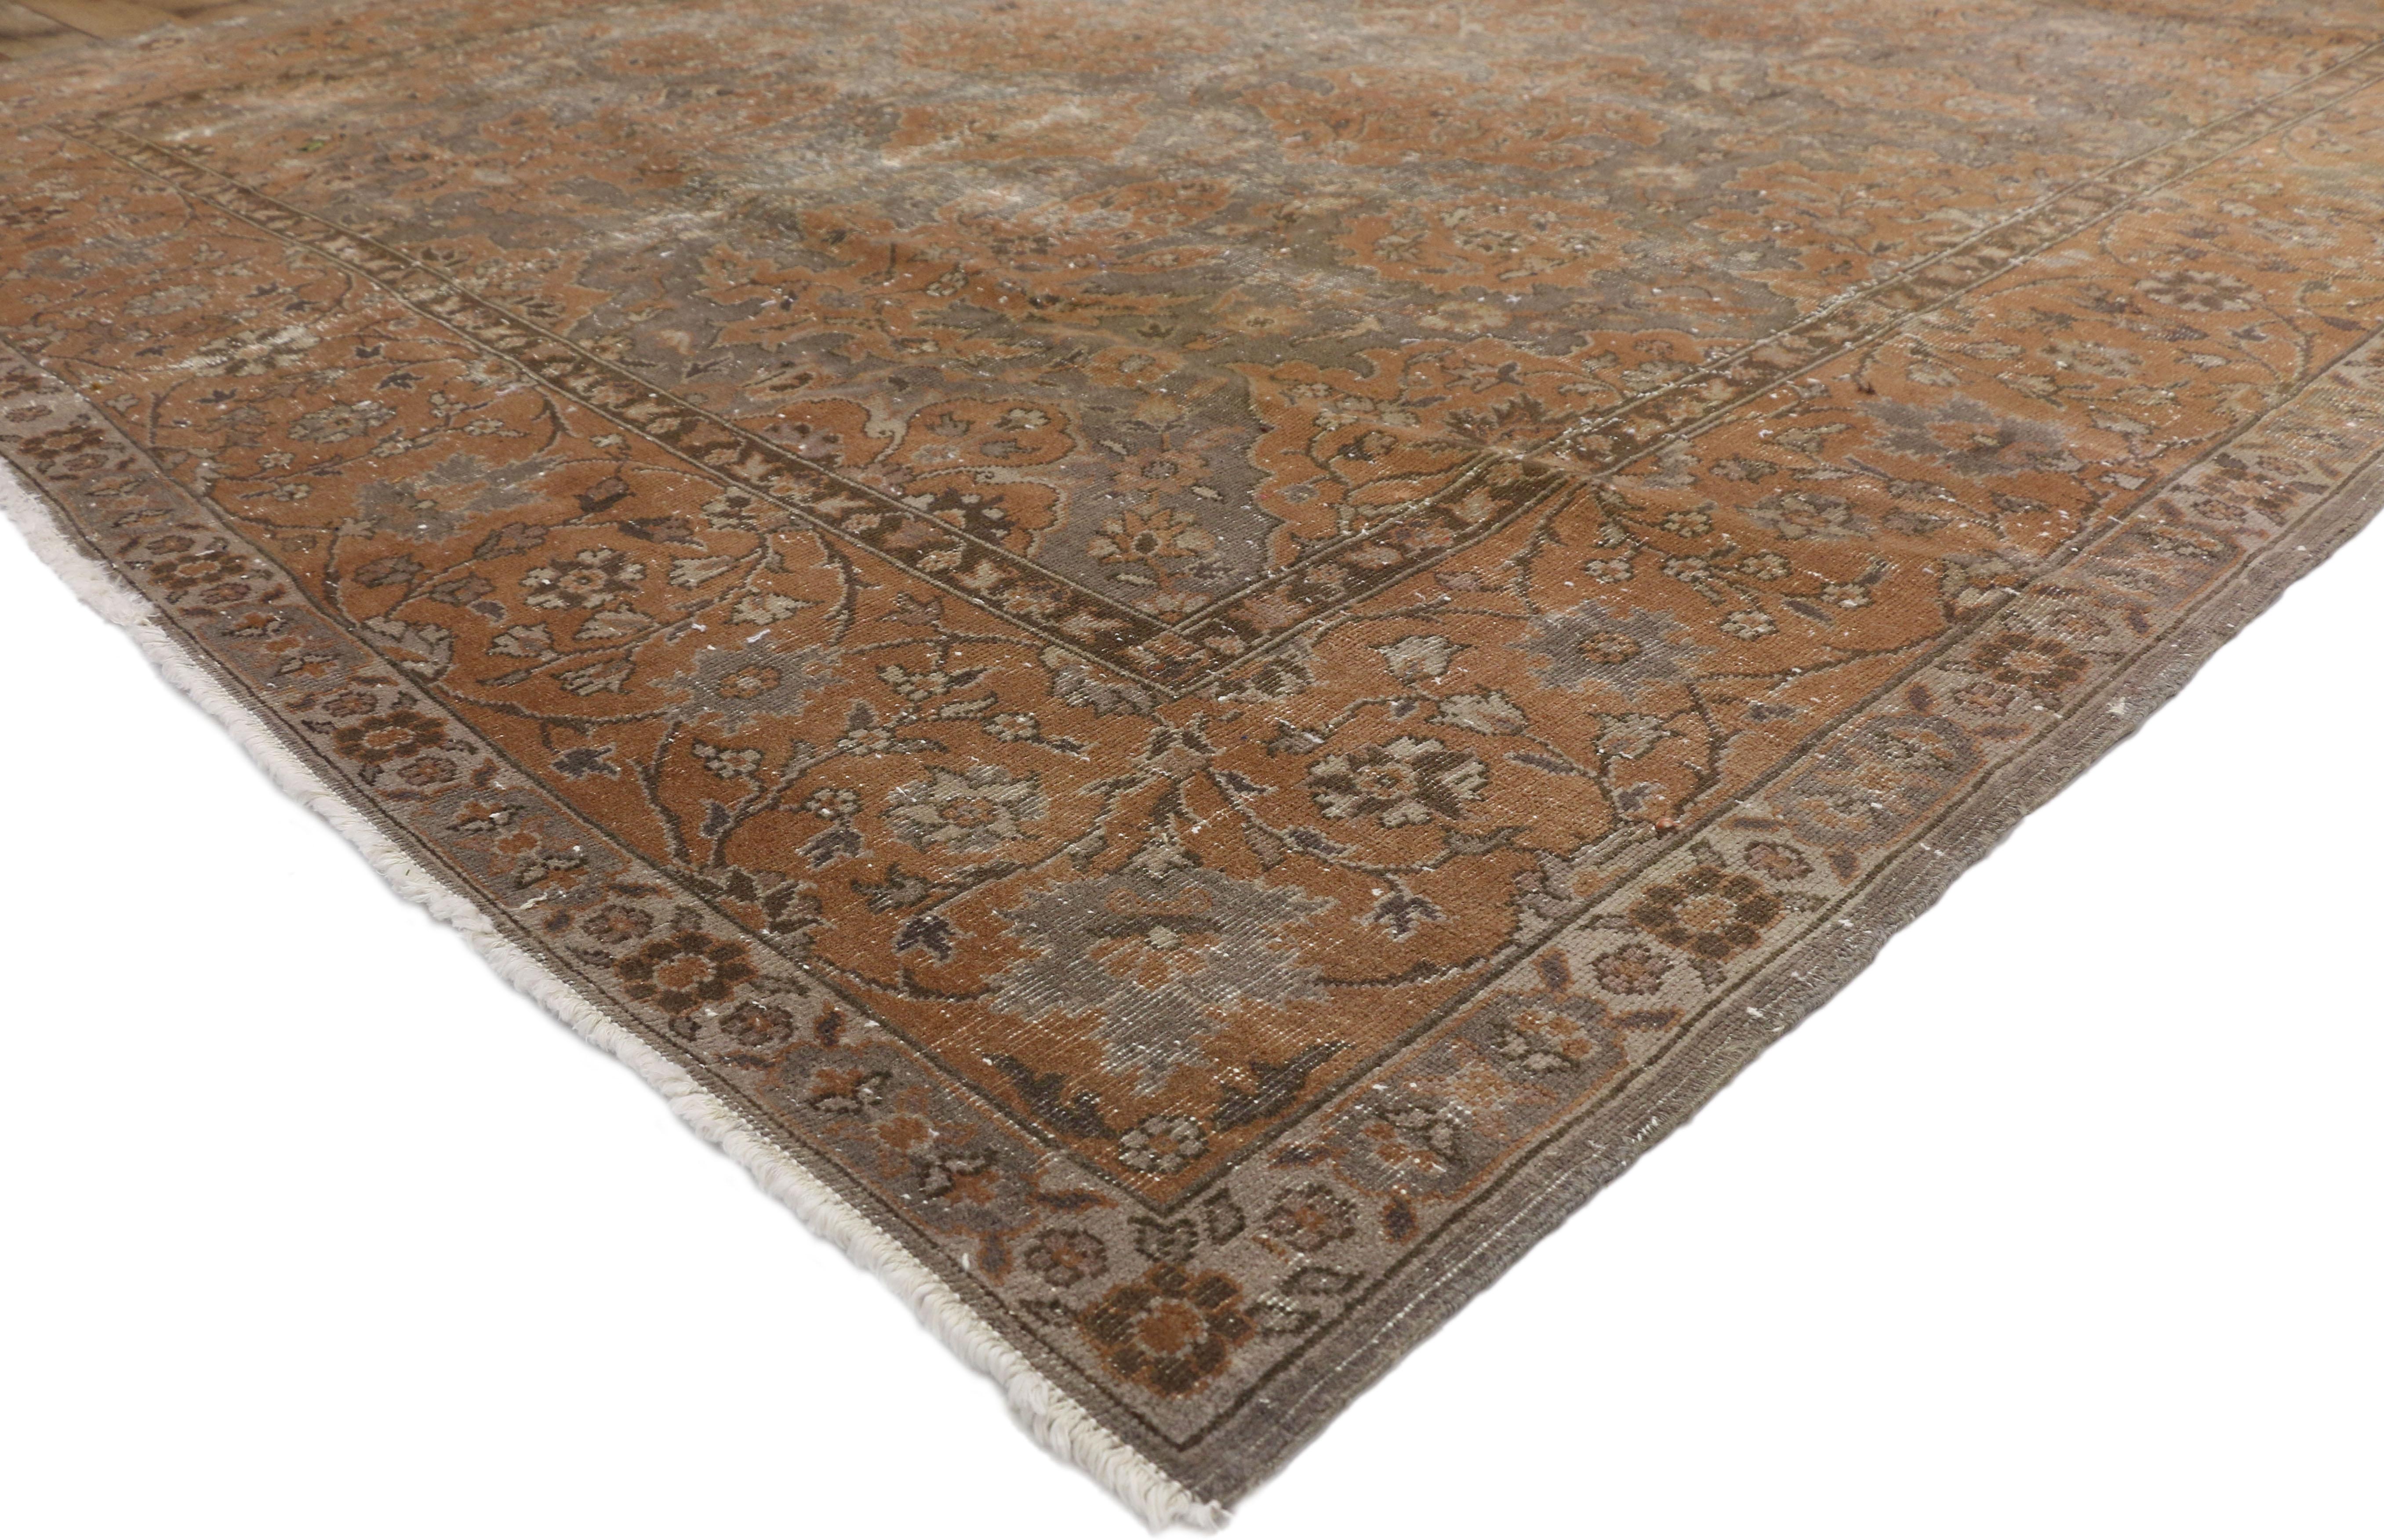 71603 Distressed Antique Turkish Sparta Area Rug with Industrial Machine Age Style. This hand-knotted wool distressed antique Turkish Sparta blends traditional elegance with a modern industrial style adding charm and perfect combination of warmth